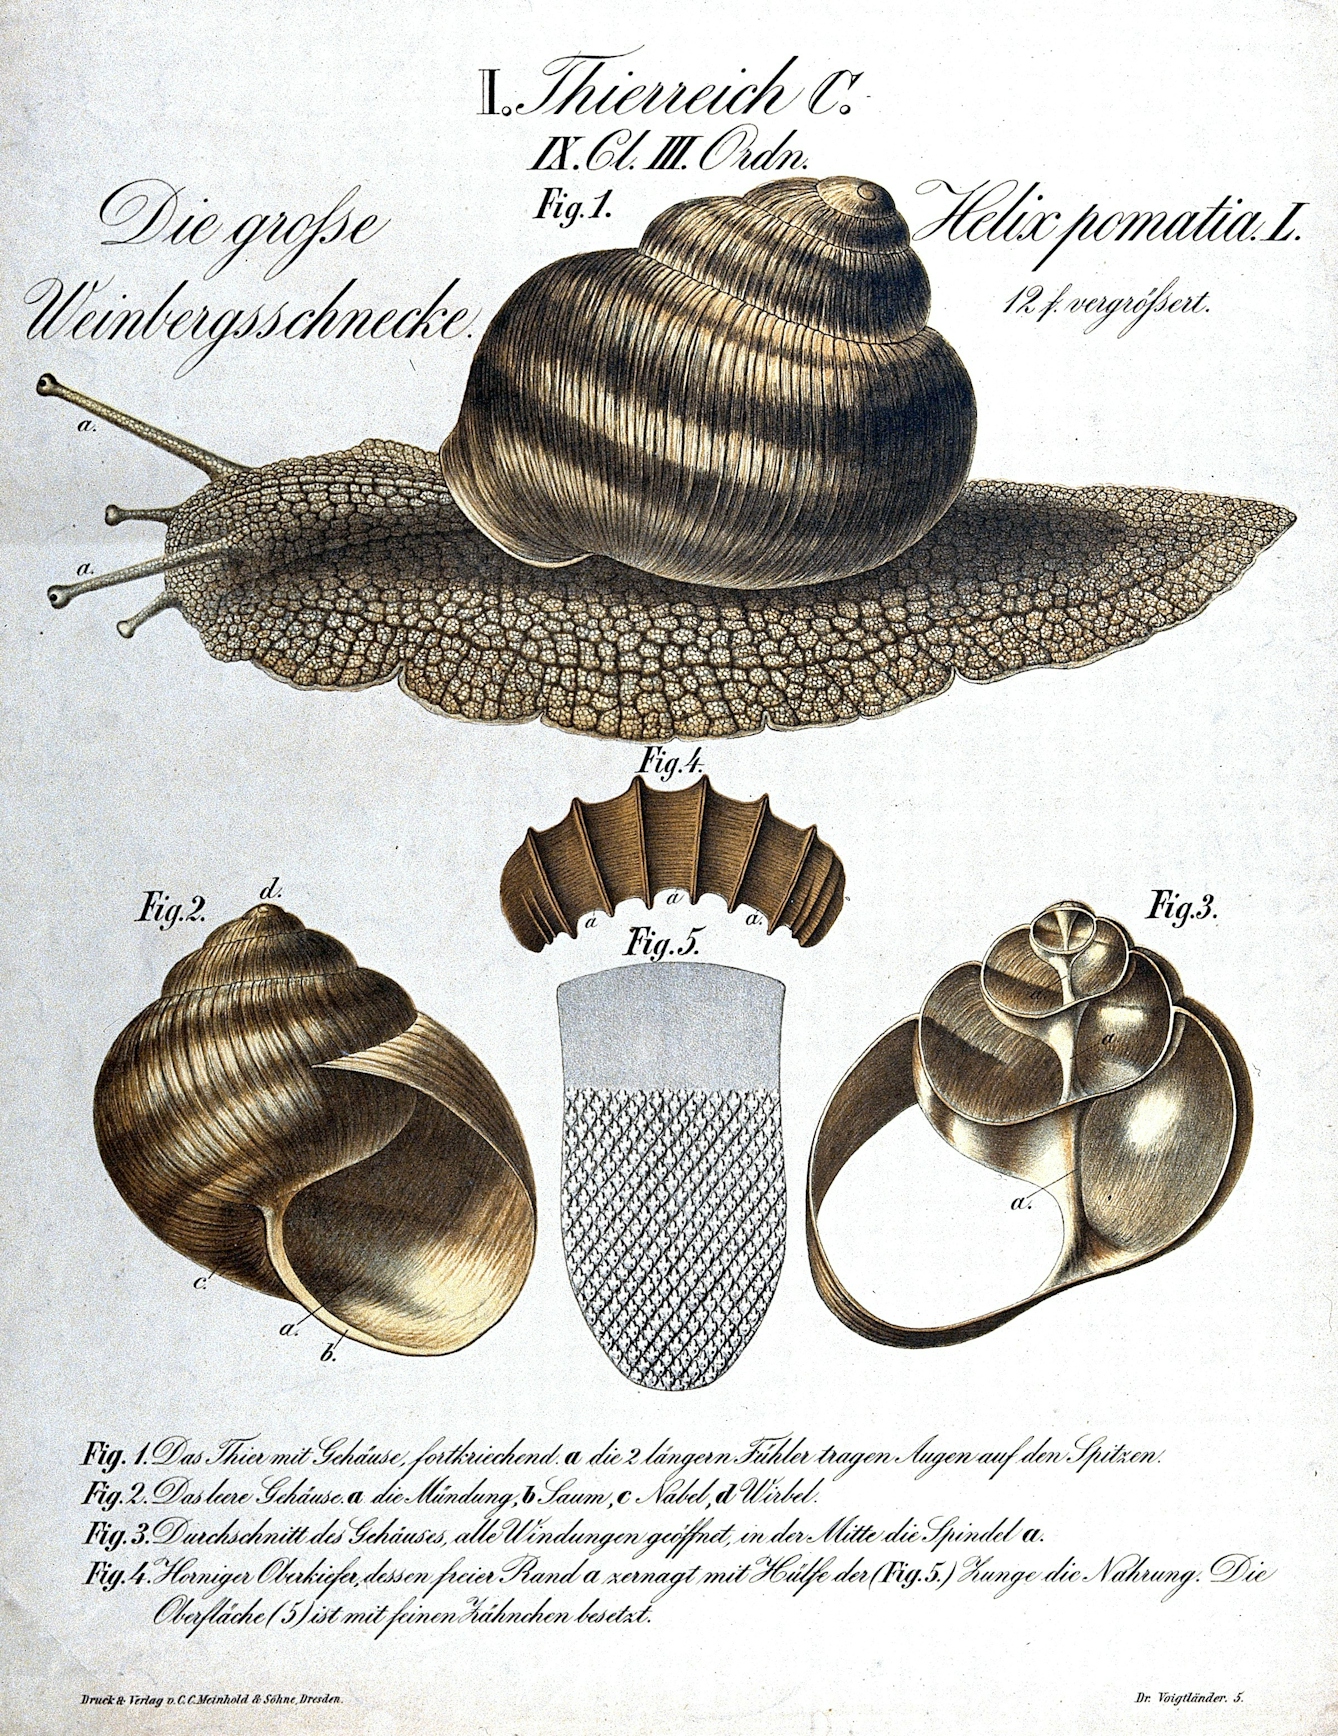 A chromolithograph diagram of an edible snail, with the whole snail above and views of the shell below.